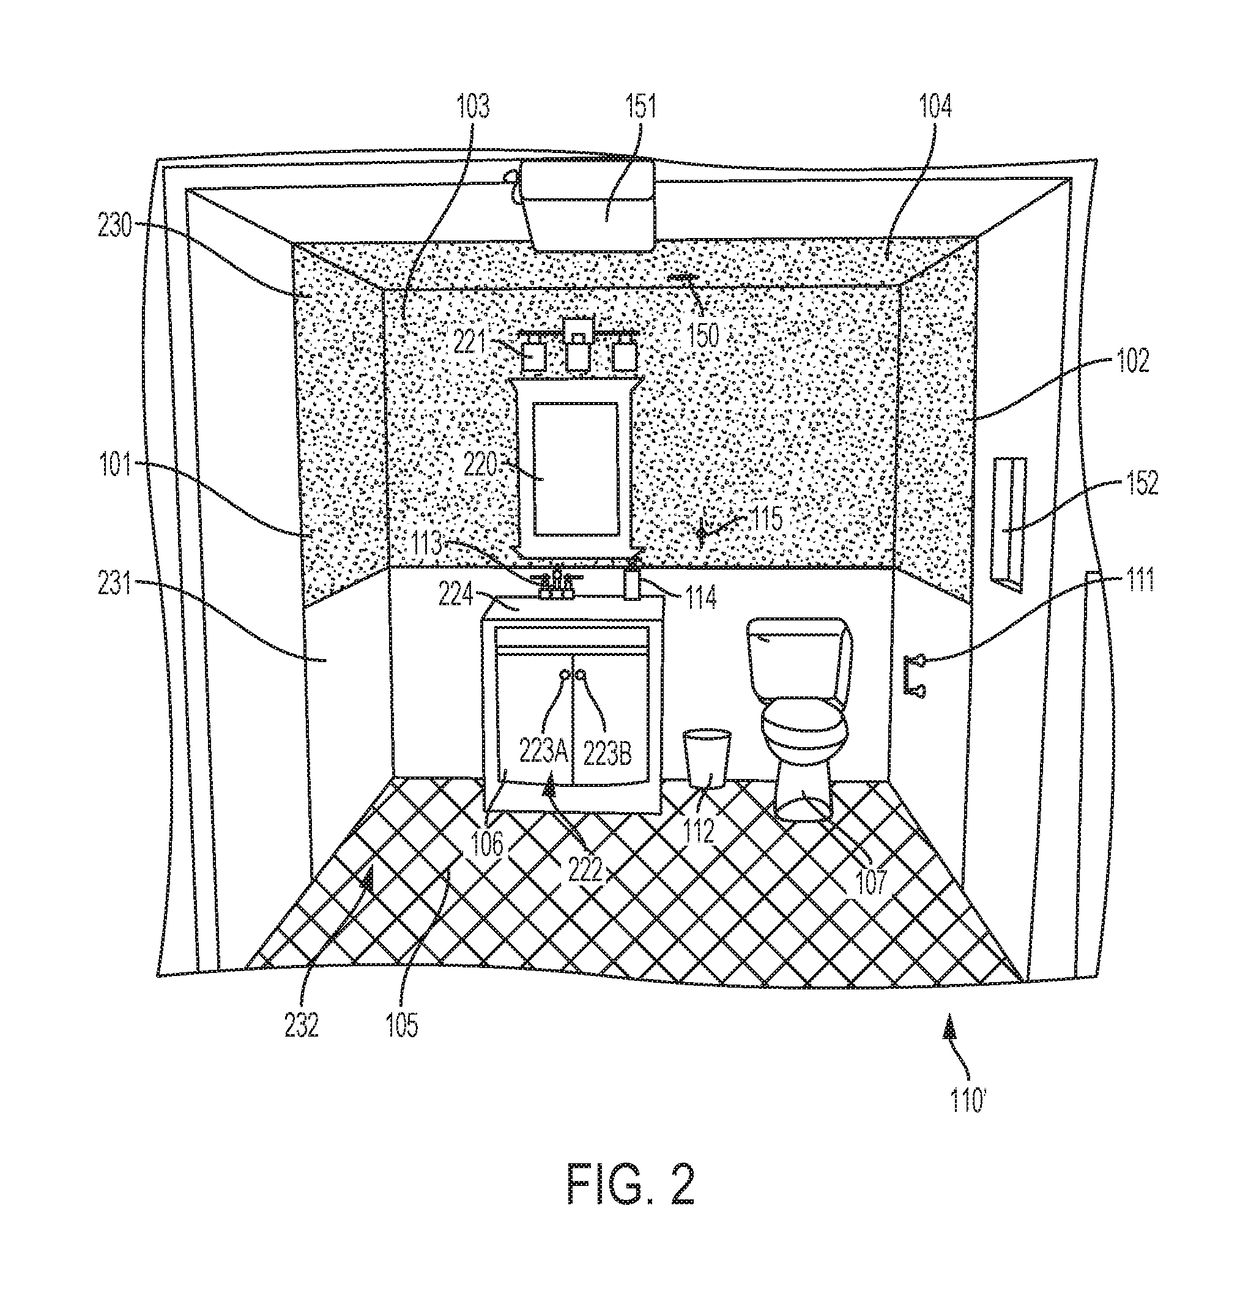 Systems and Methods for Displaying a Simulated Room and Portions Thereof